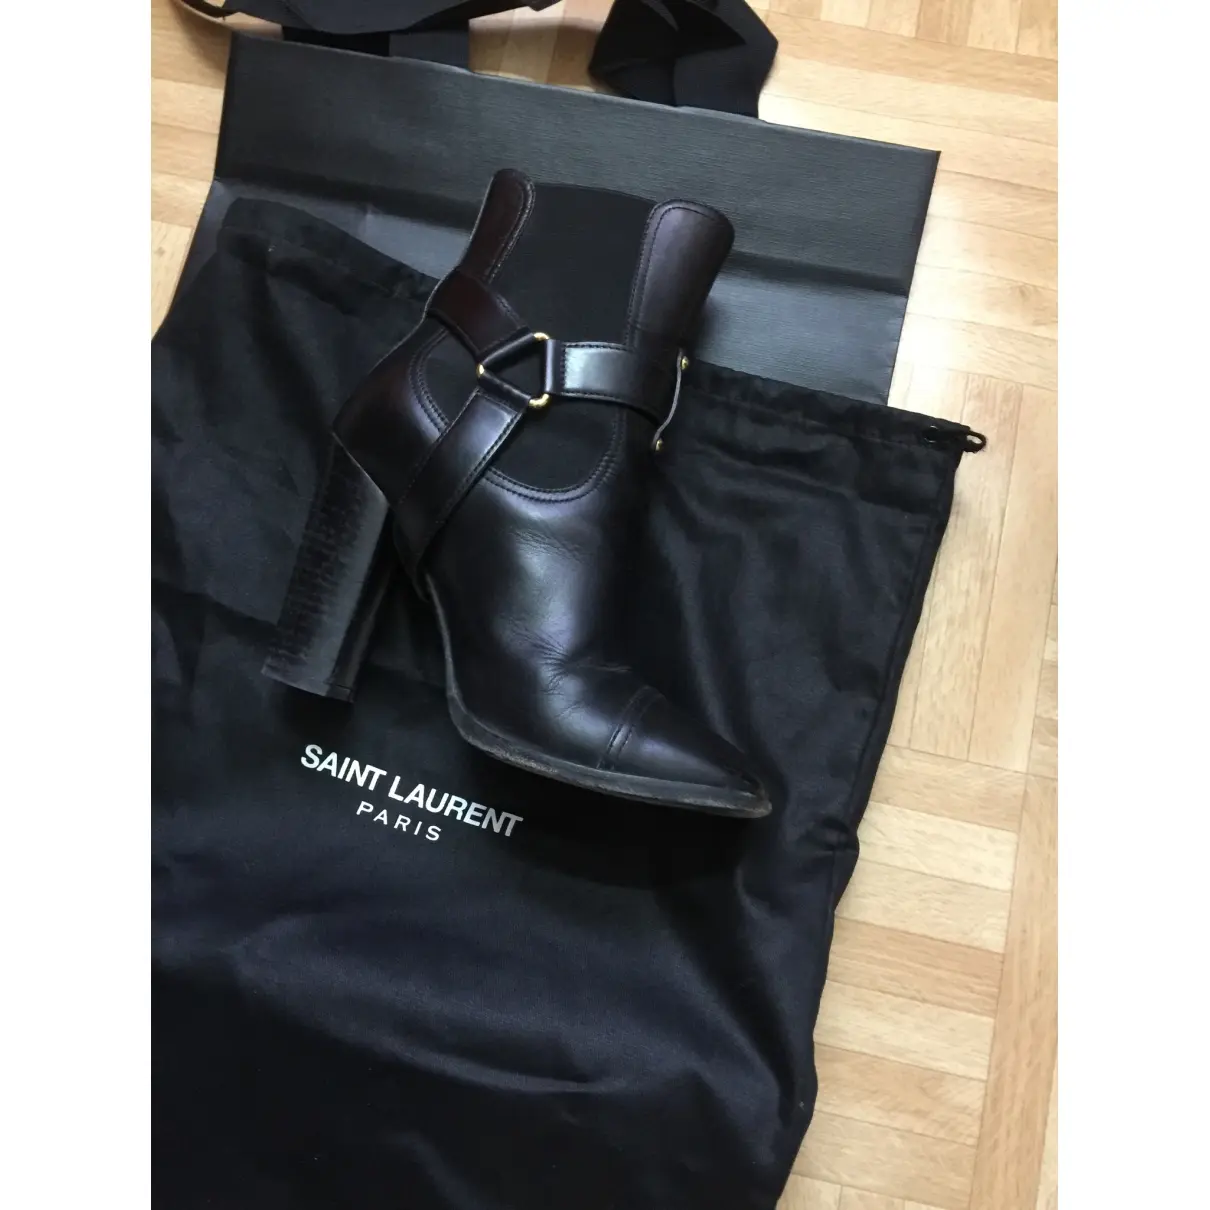 Yves Saint Laurent Leather ankle boots for sale - Vintage